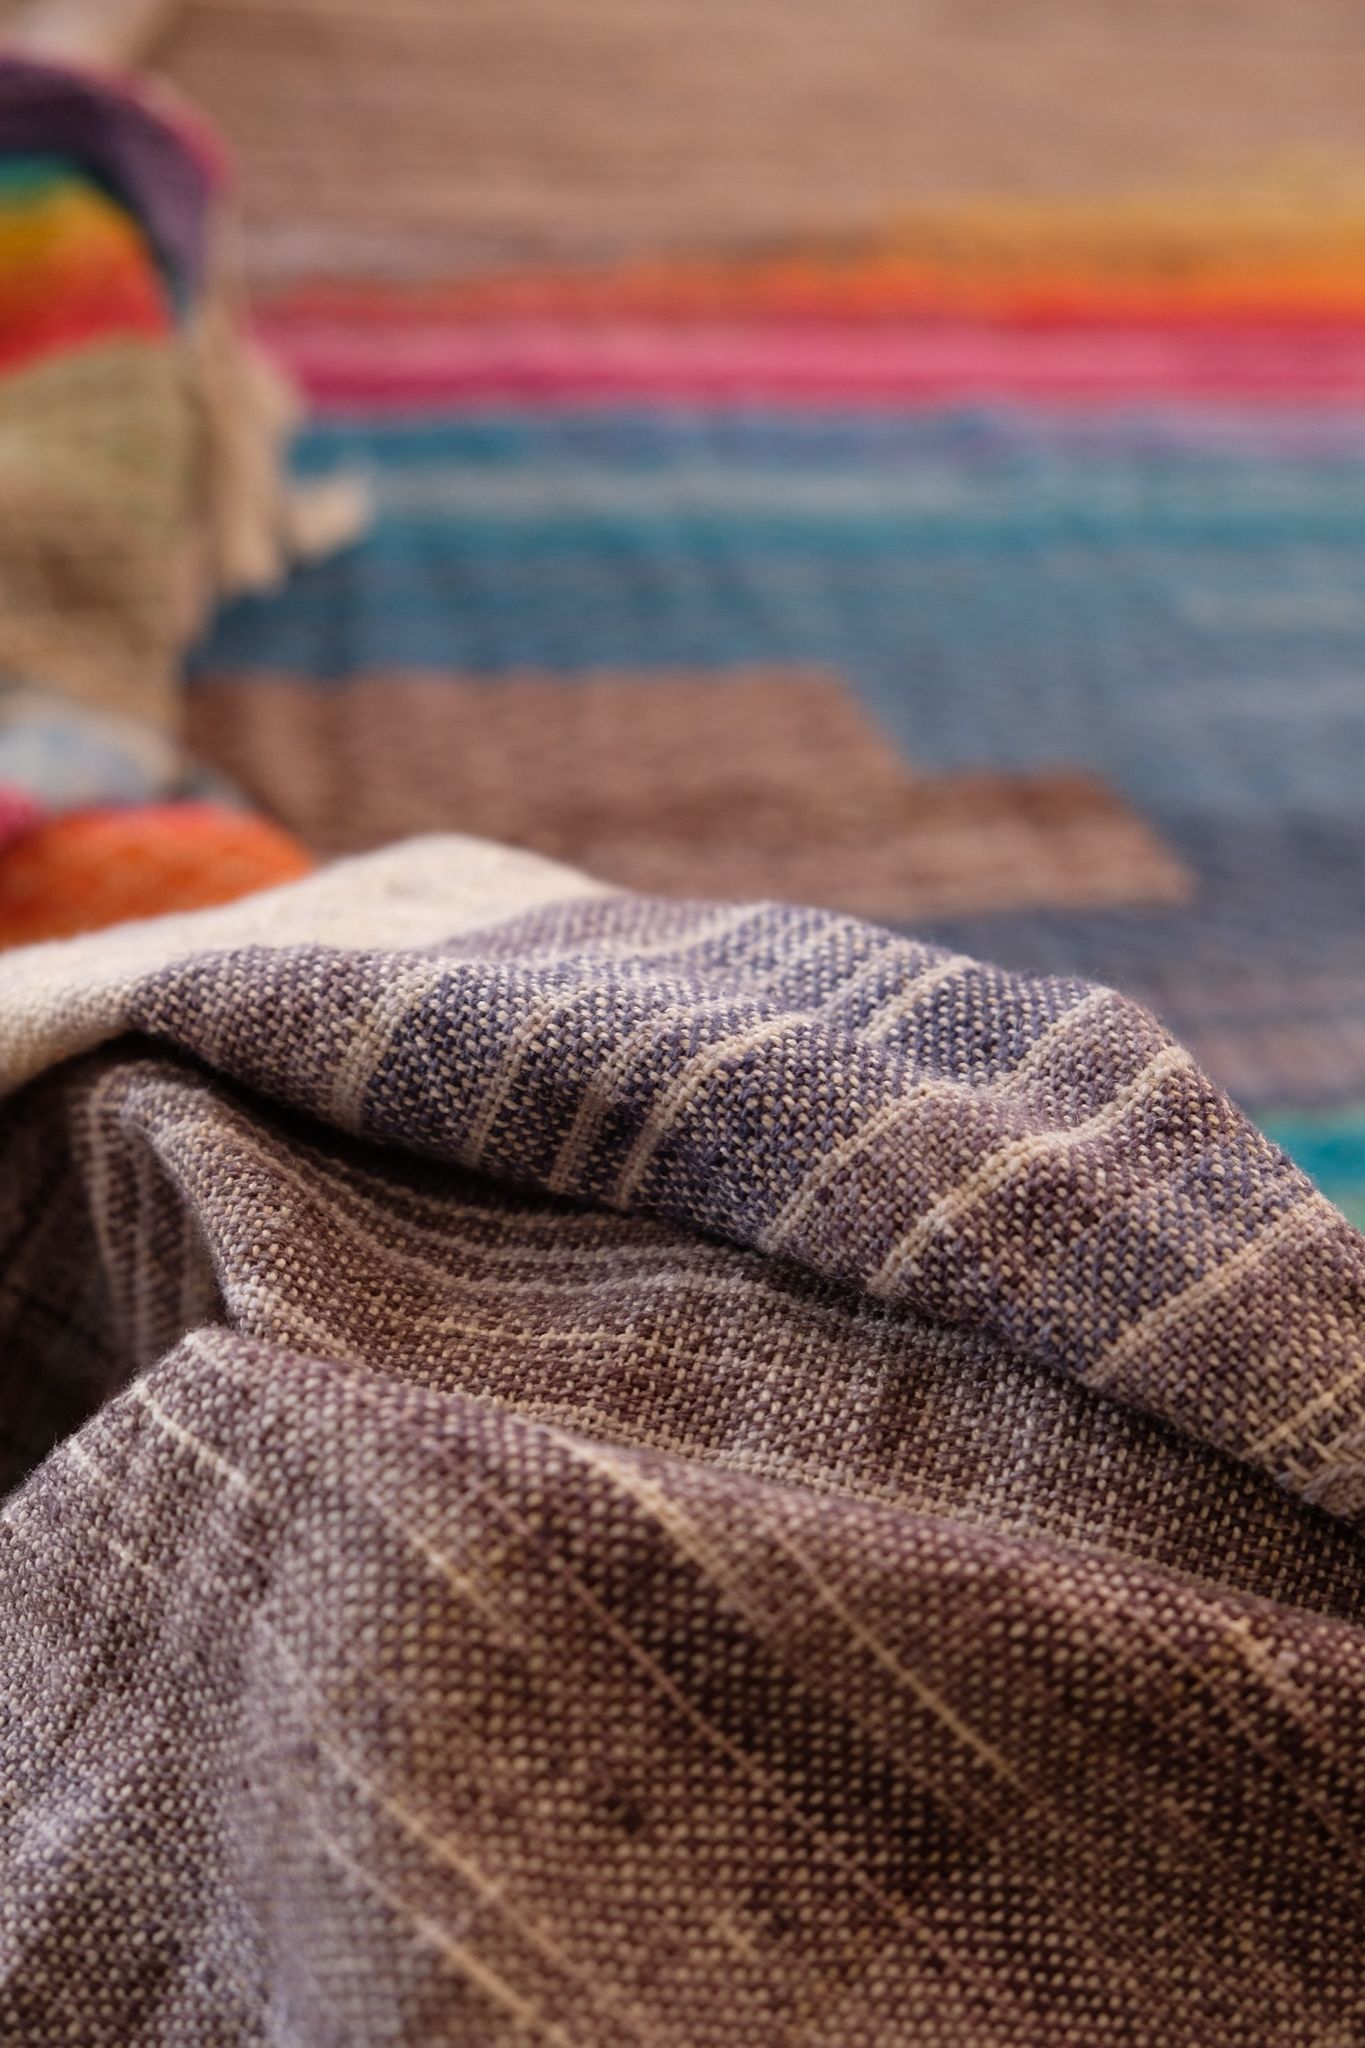 Handwoven raw silk fabric with textures diamond weave in browns, tans, purples, blues, yellows, pink and orange